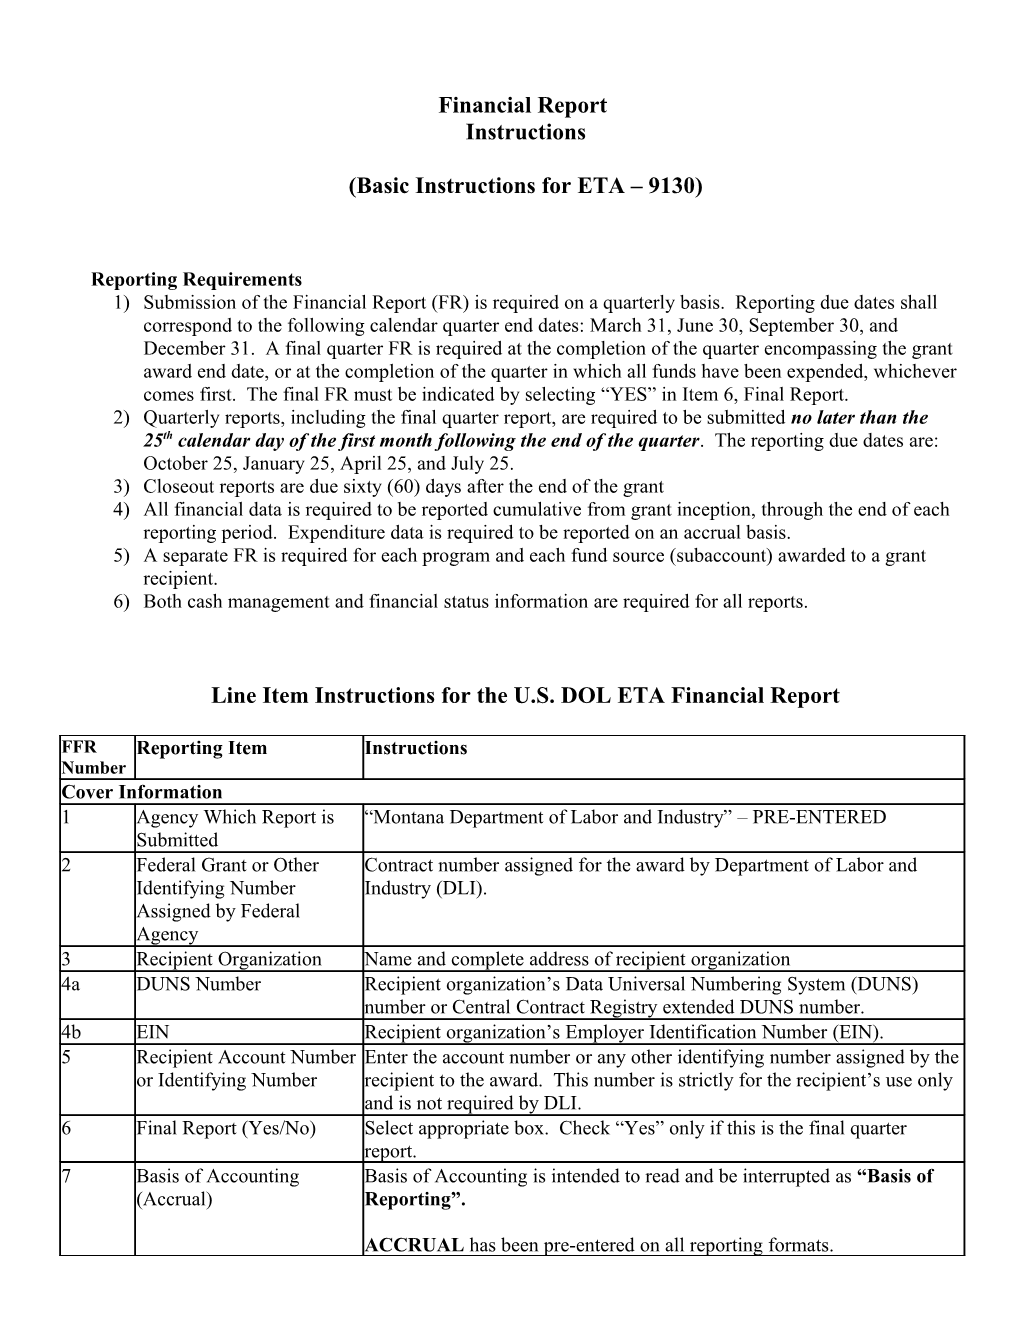 Line Item Instructions for the Federal Financial Report